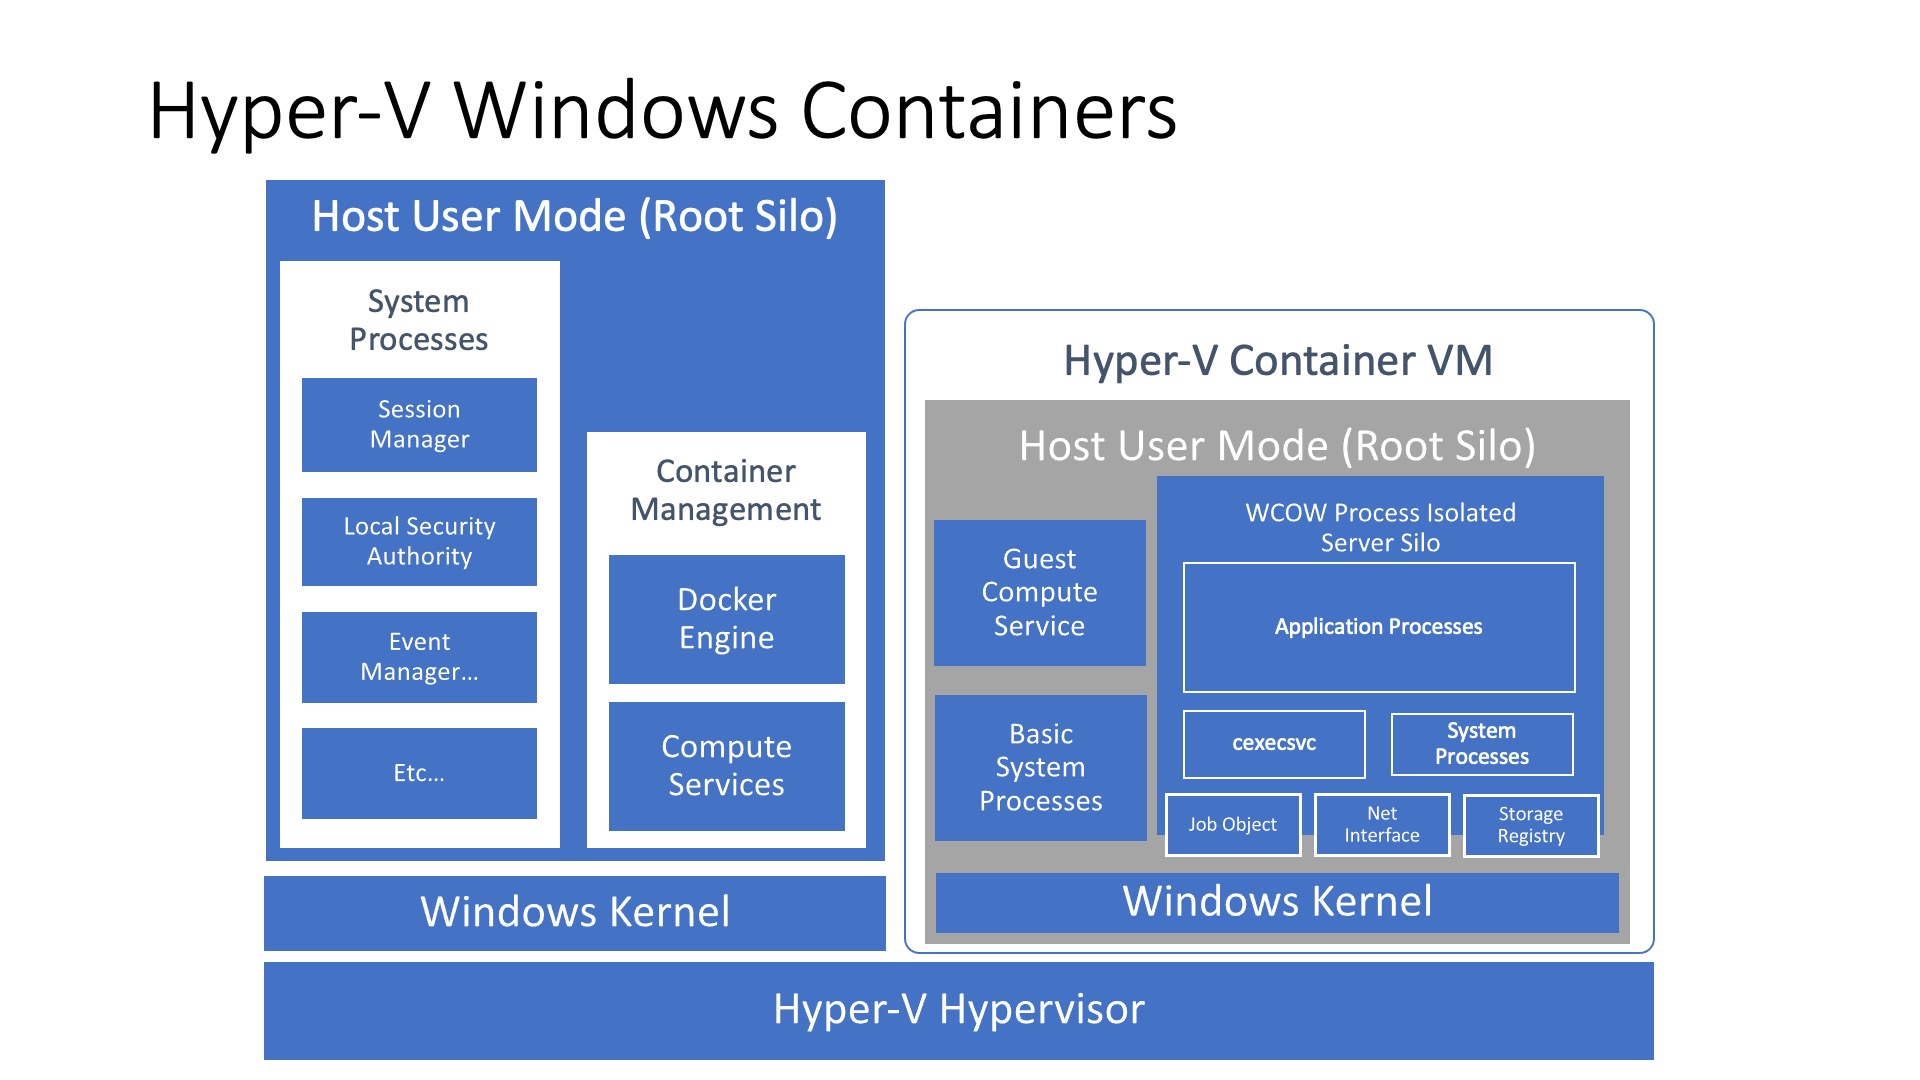 Architecture of an container running in Hyper-V isolation mode. The process runs inside a lightweight, stateless and immutable Hyper-V Windows guest VM which has a separate kernel. Inside the VM the process runs as if was running in process isolation mode.